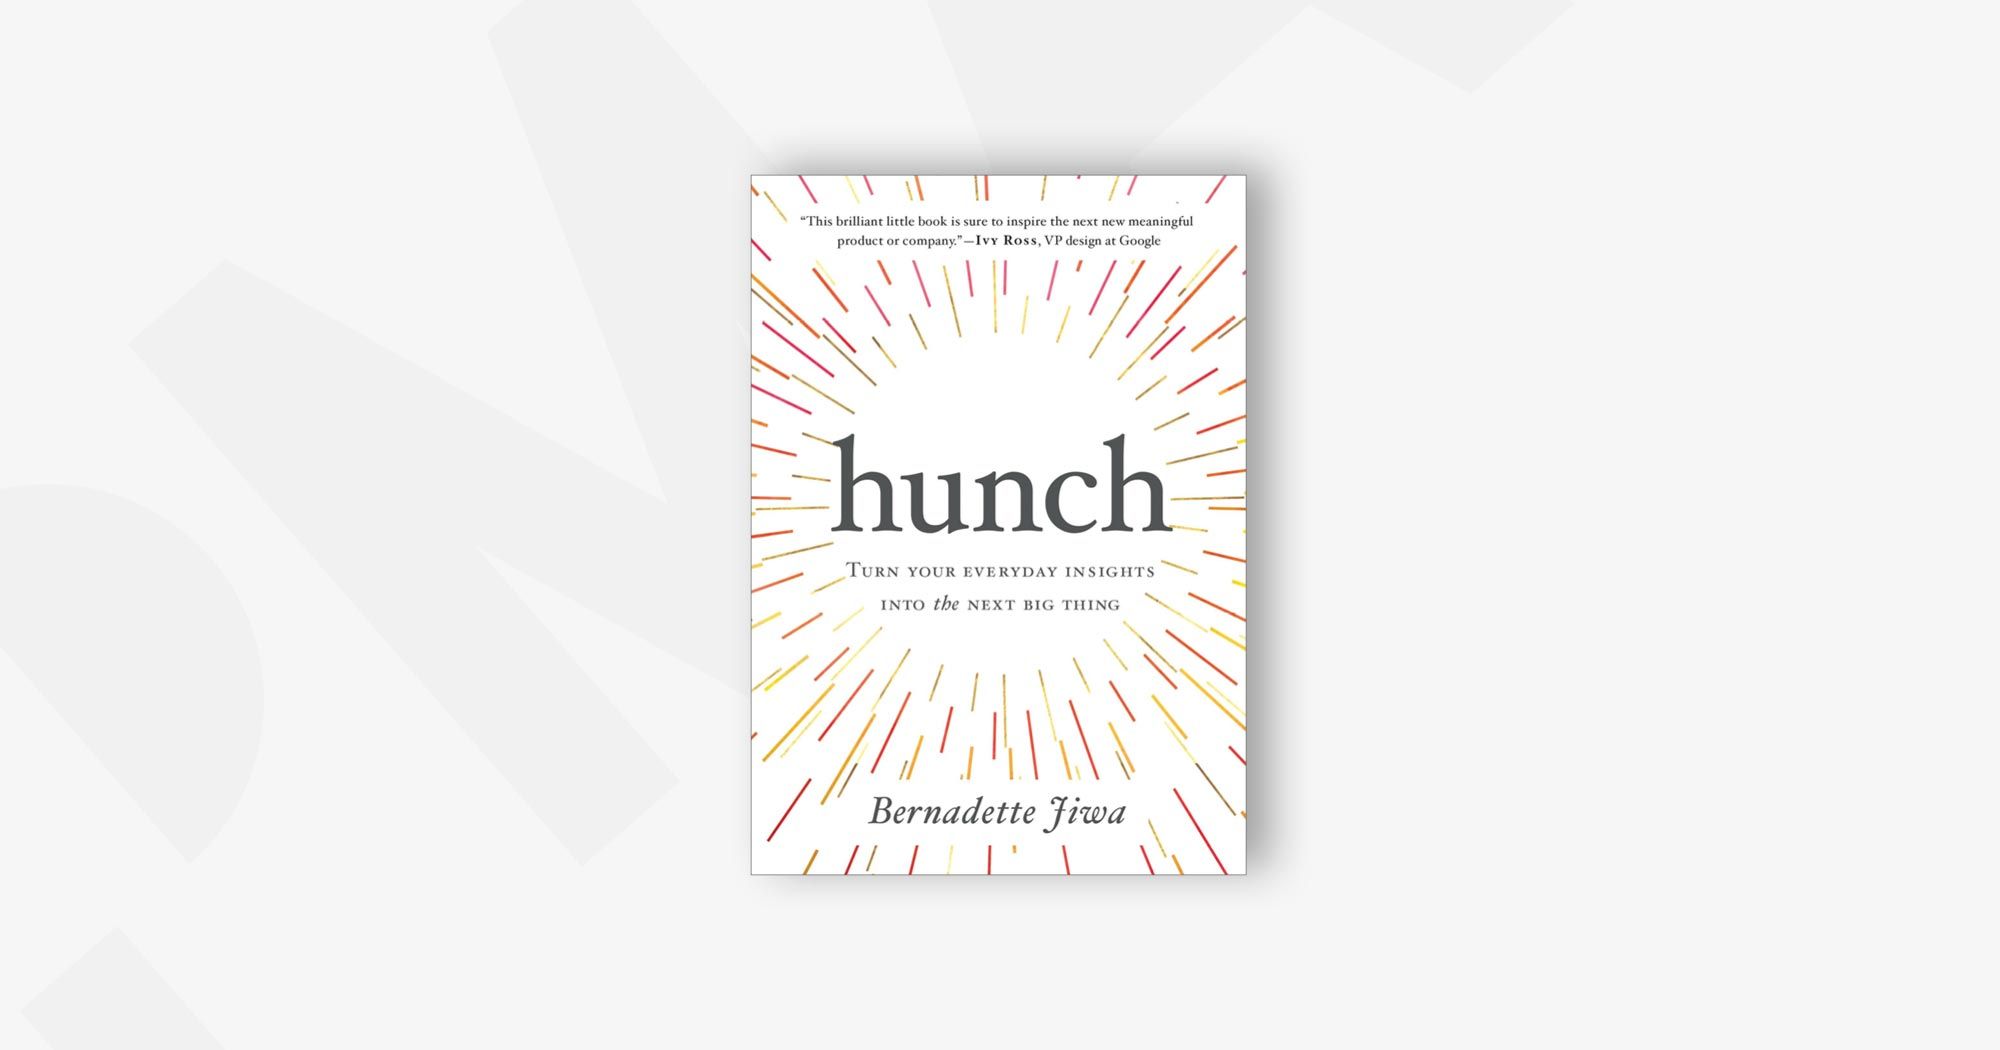 Hunch: Turn Your Everyday Insights Into the Next Big Thing – Bernadette Jiwa